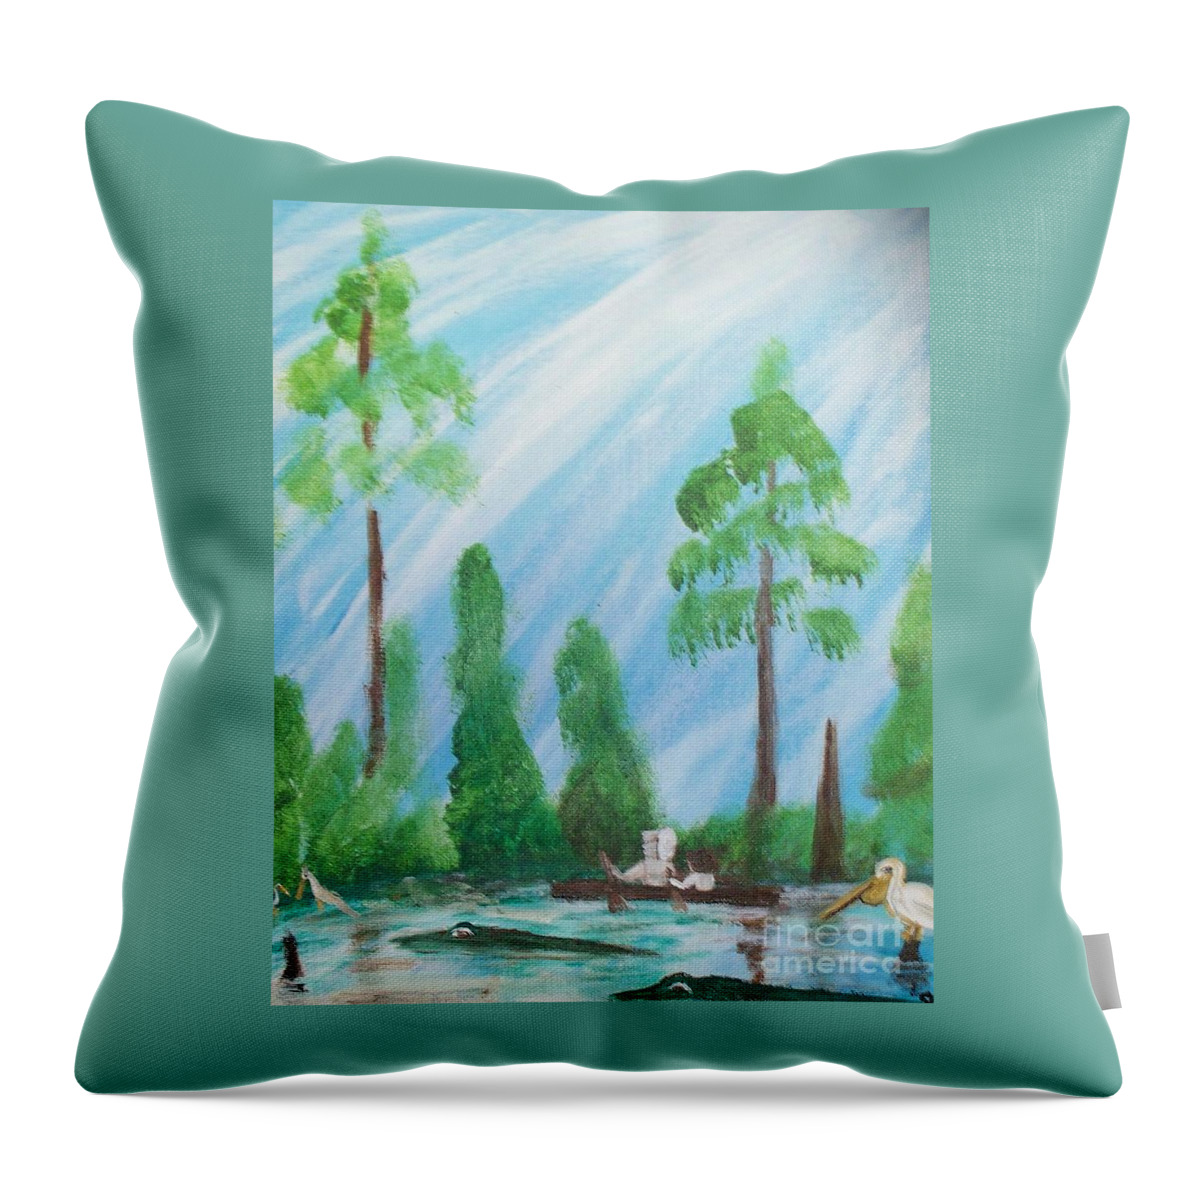 Brave Mother And Child Throw Pillow featuring the painting Brave Mother and Child by Seaux-N-Seau Soileau